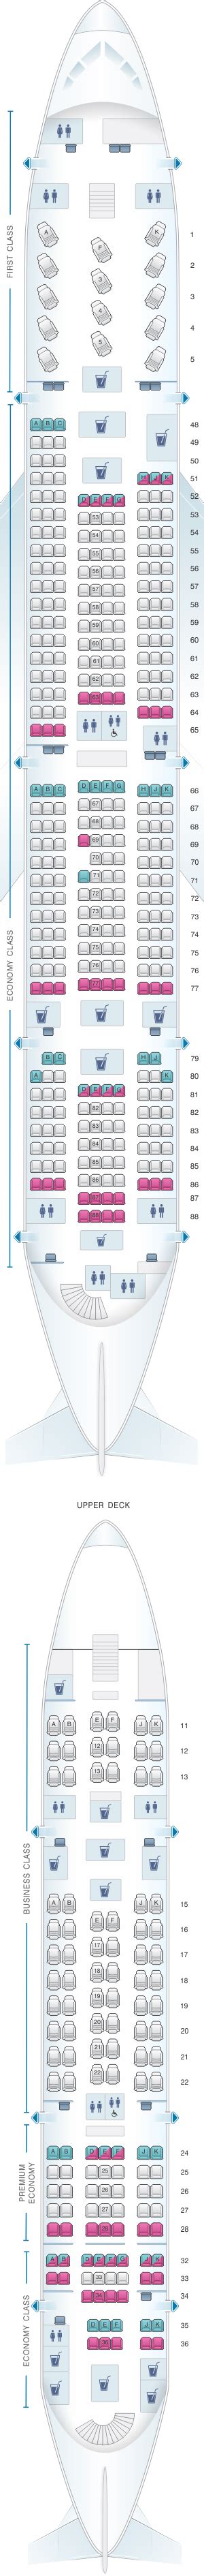 Airbus A380 800 Seat Map